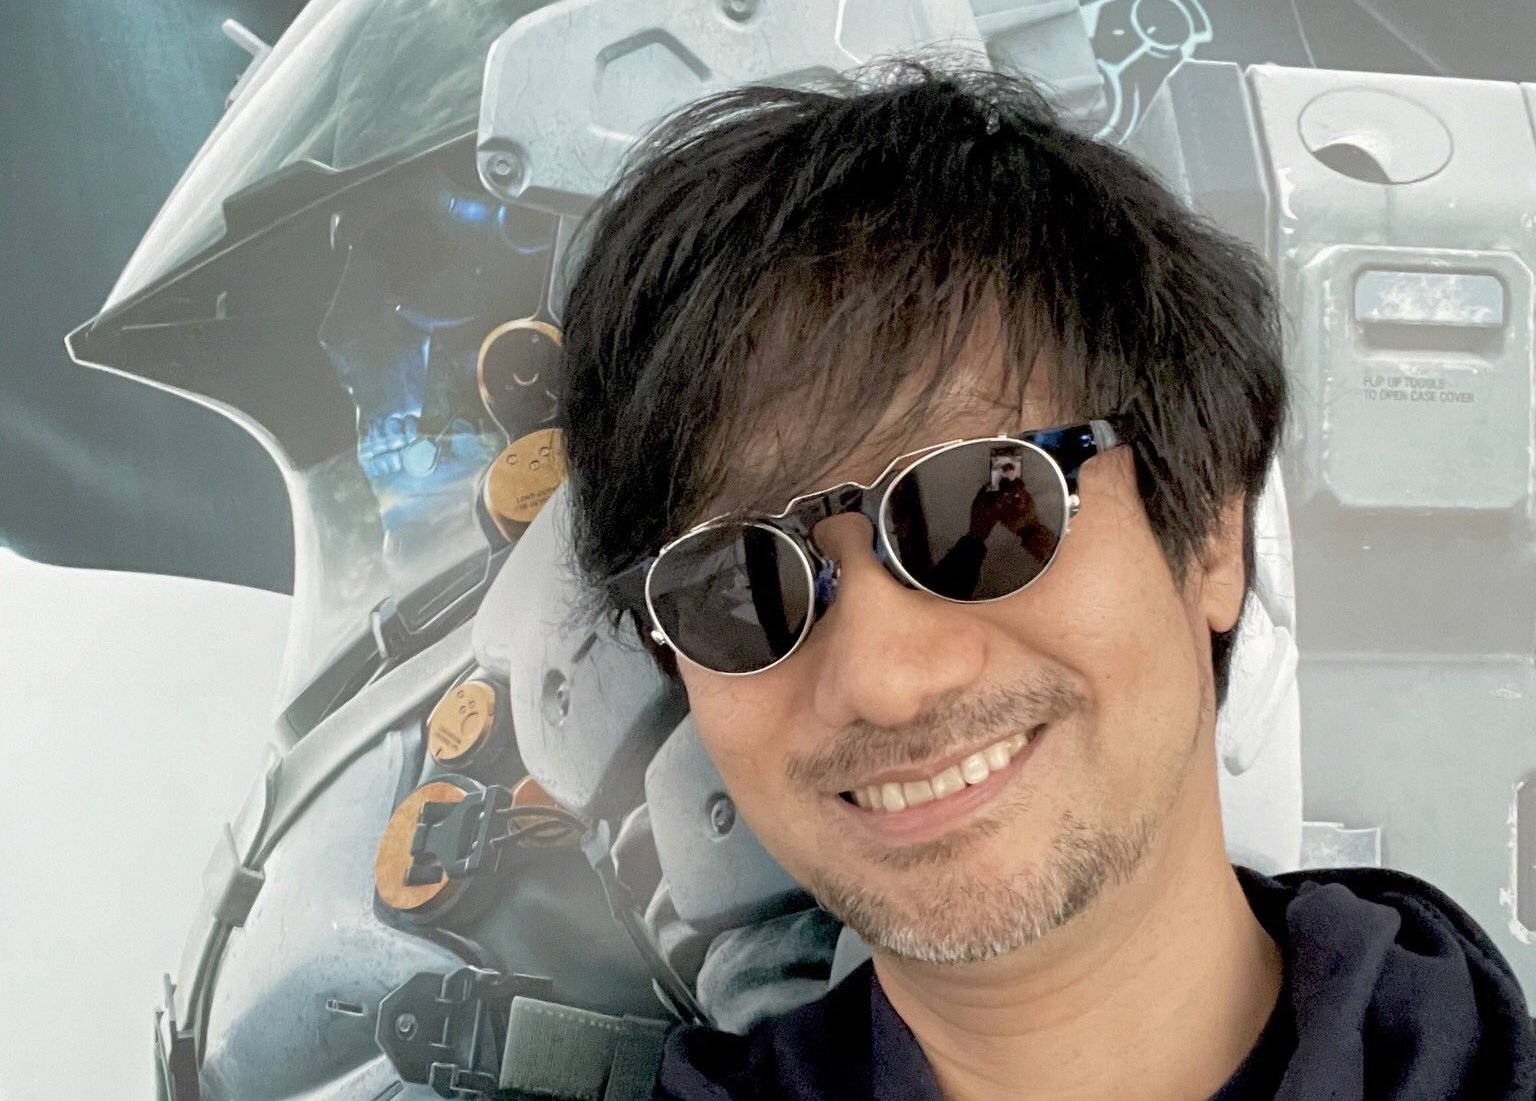 Hideo Kojima teases mystery project on Twitter